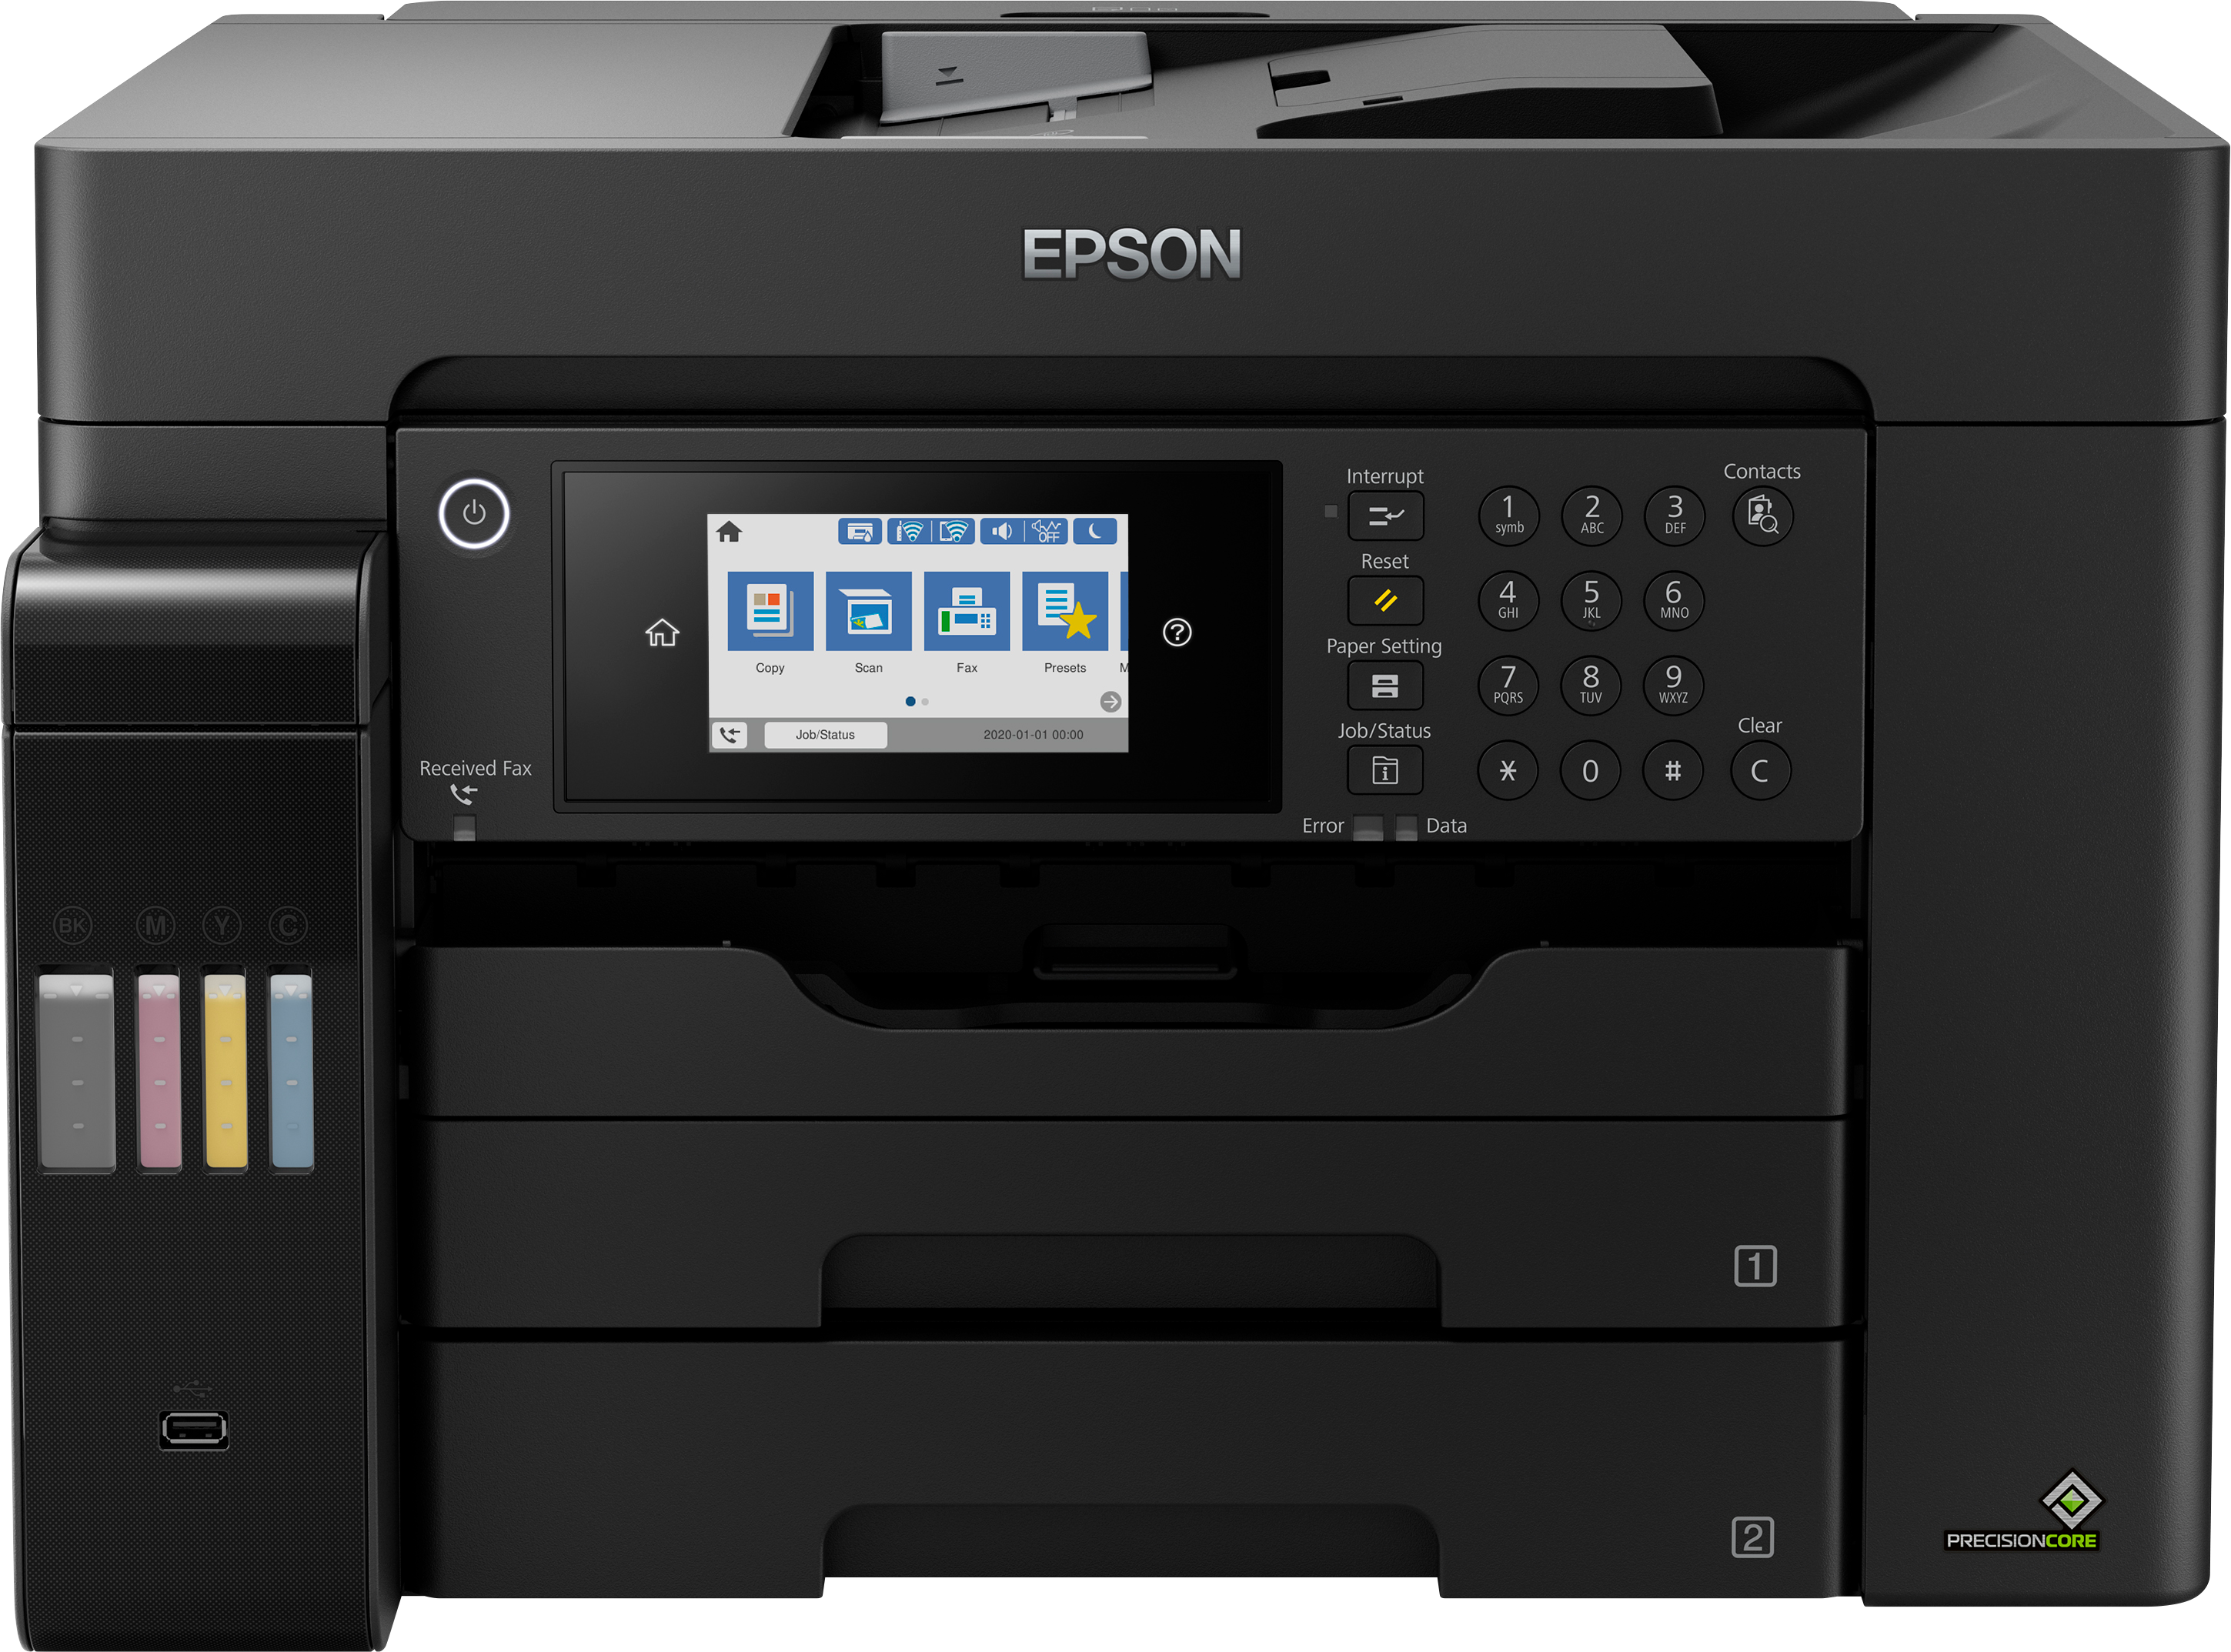 Epson EcoTank L15160 A3 Wi-Fi Duplex All-in-One Ink Tank Printer, THE IDEAL  CHOICE